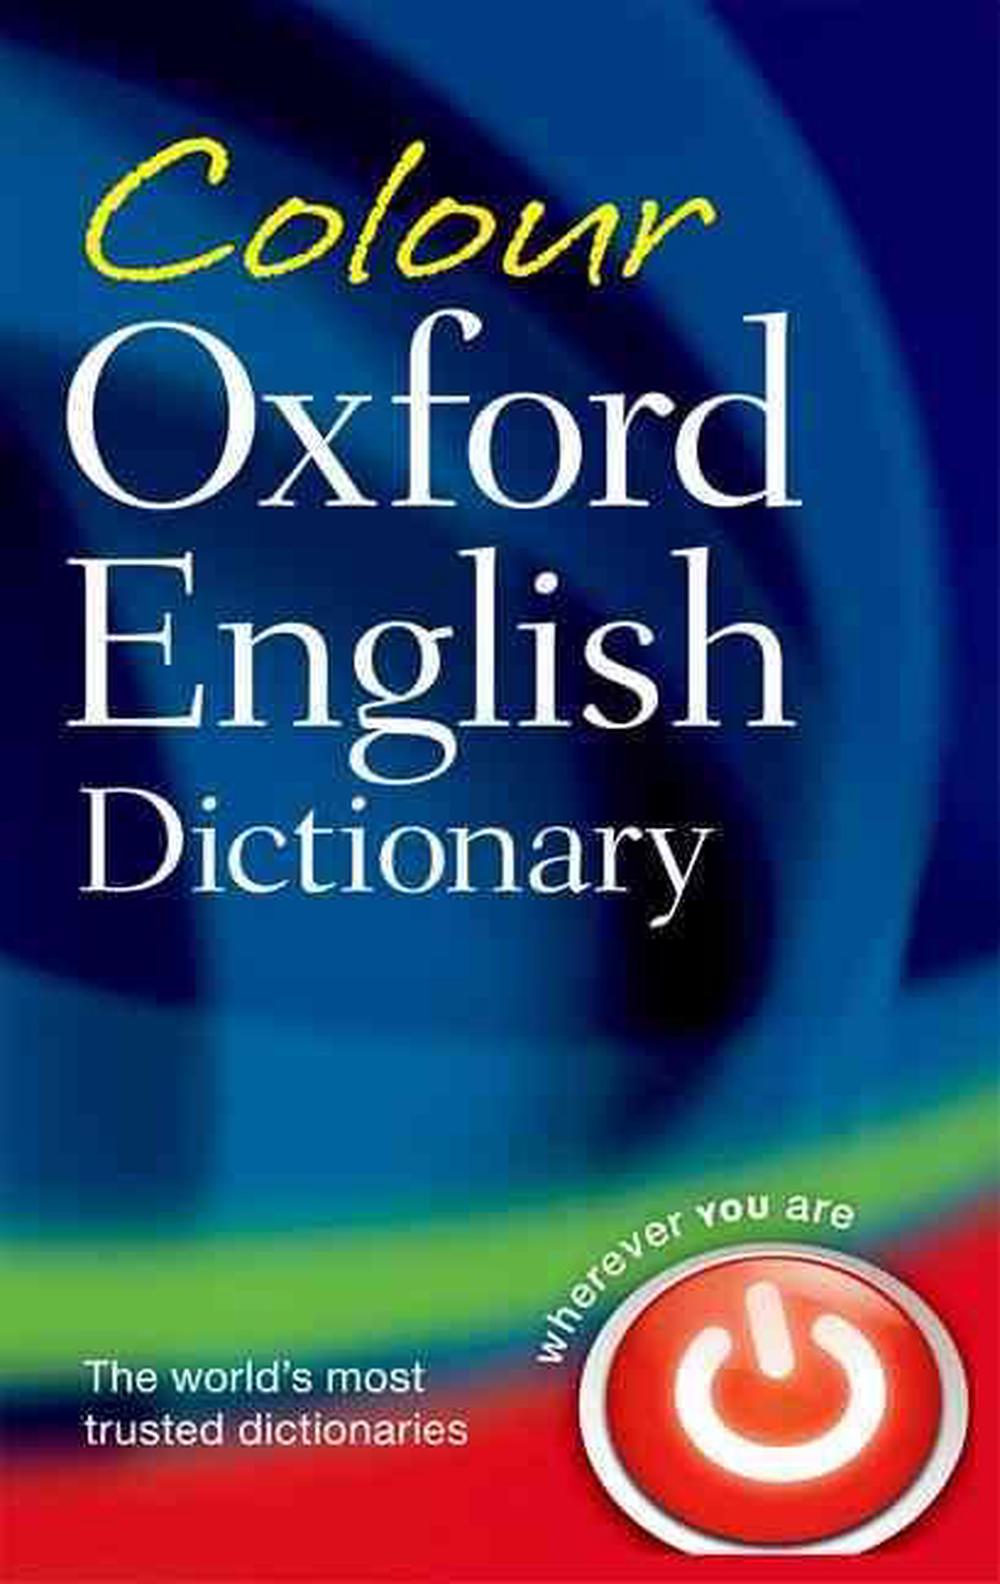 Colour Oxford English Dictionary by Oxford Languages, Paperback